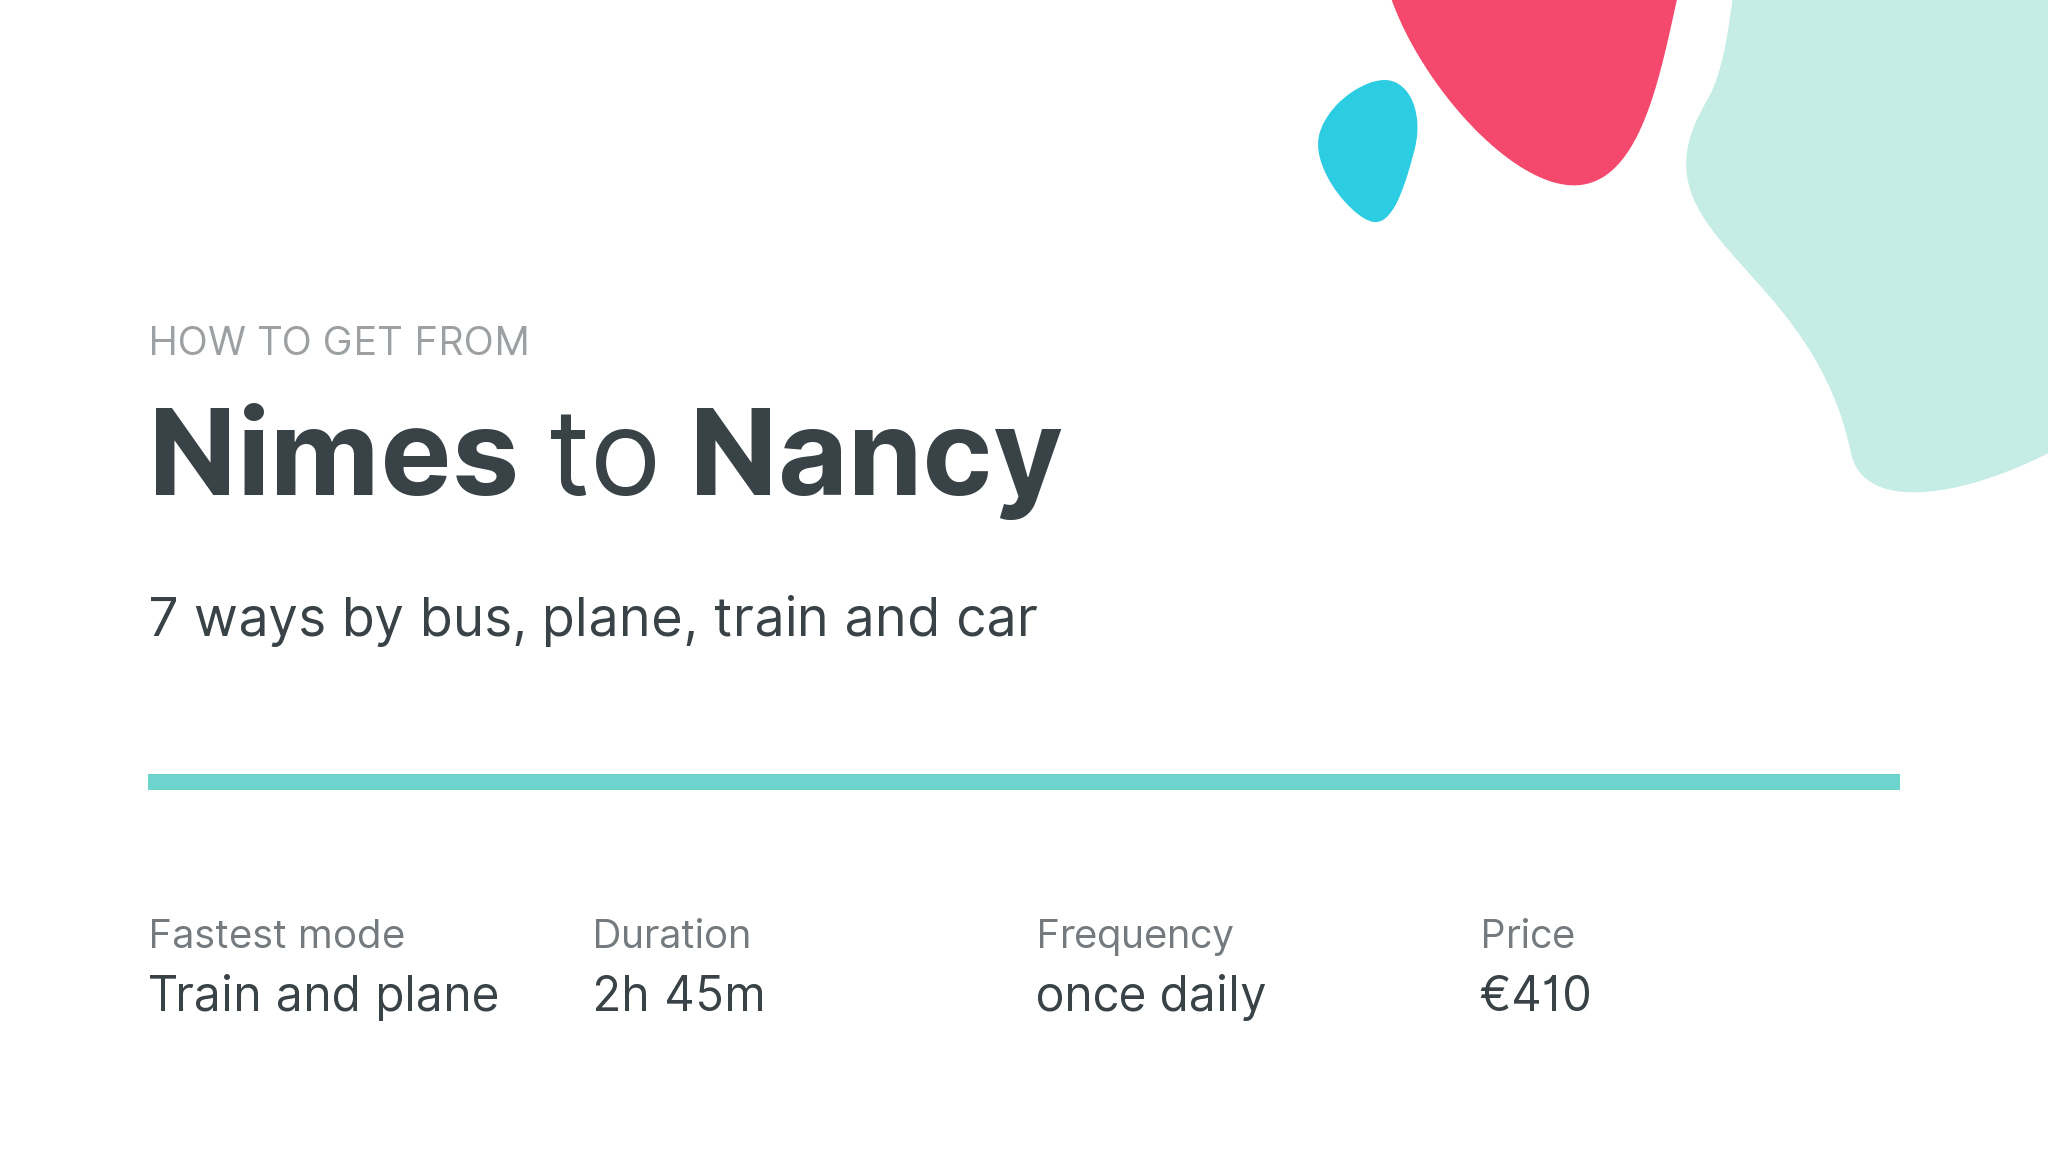 How do I get from Nimes to Nancy